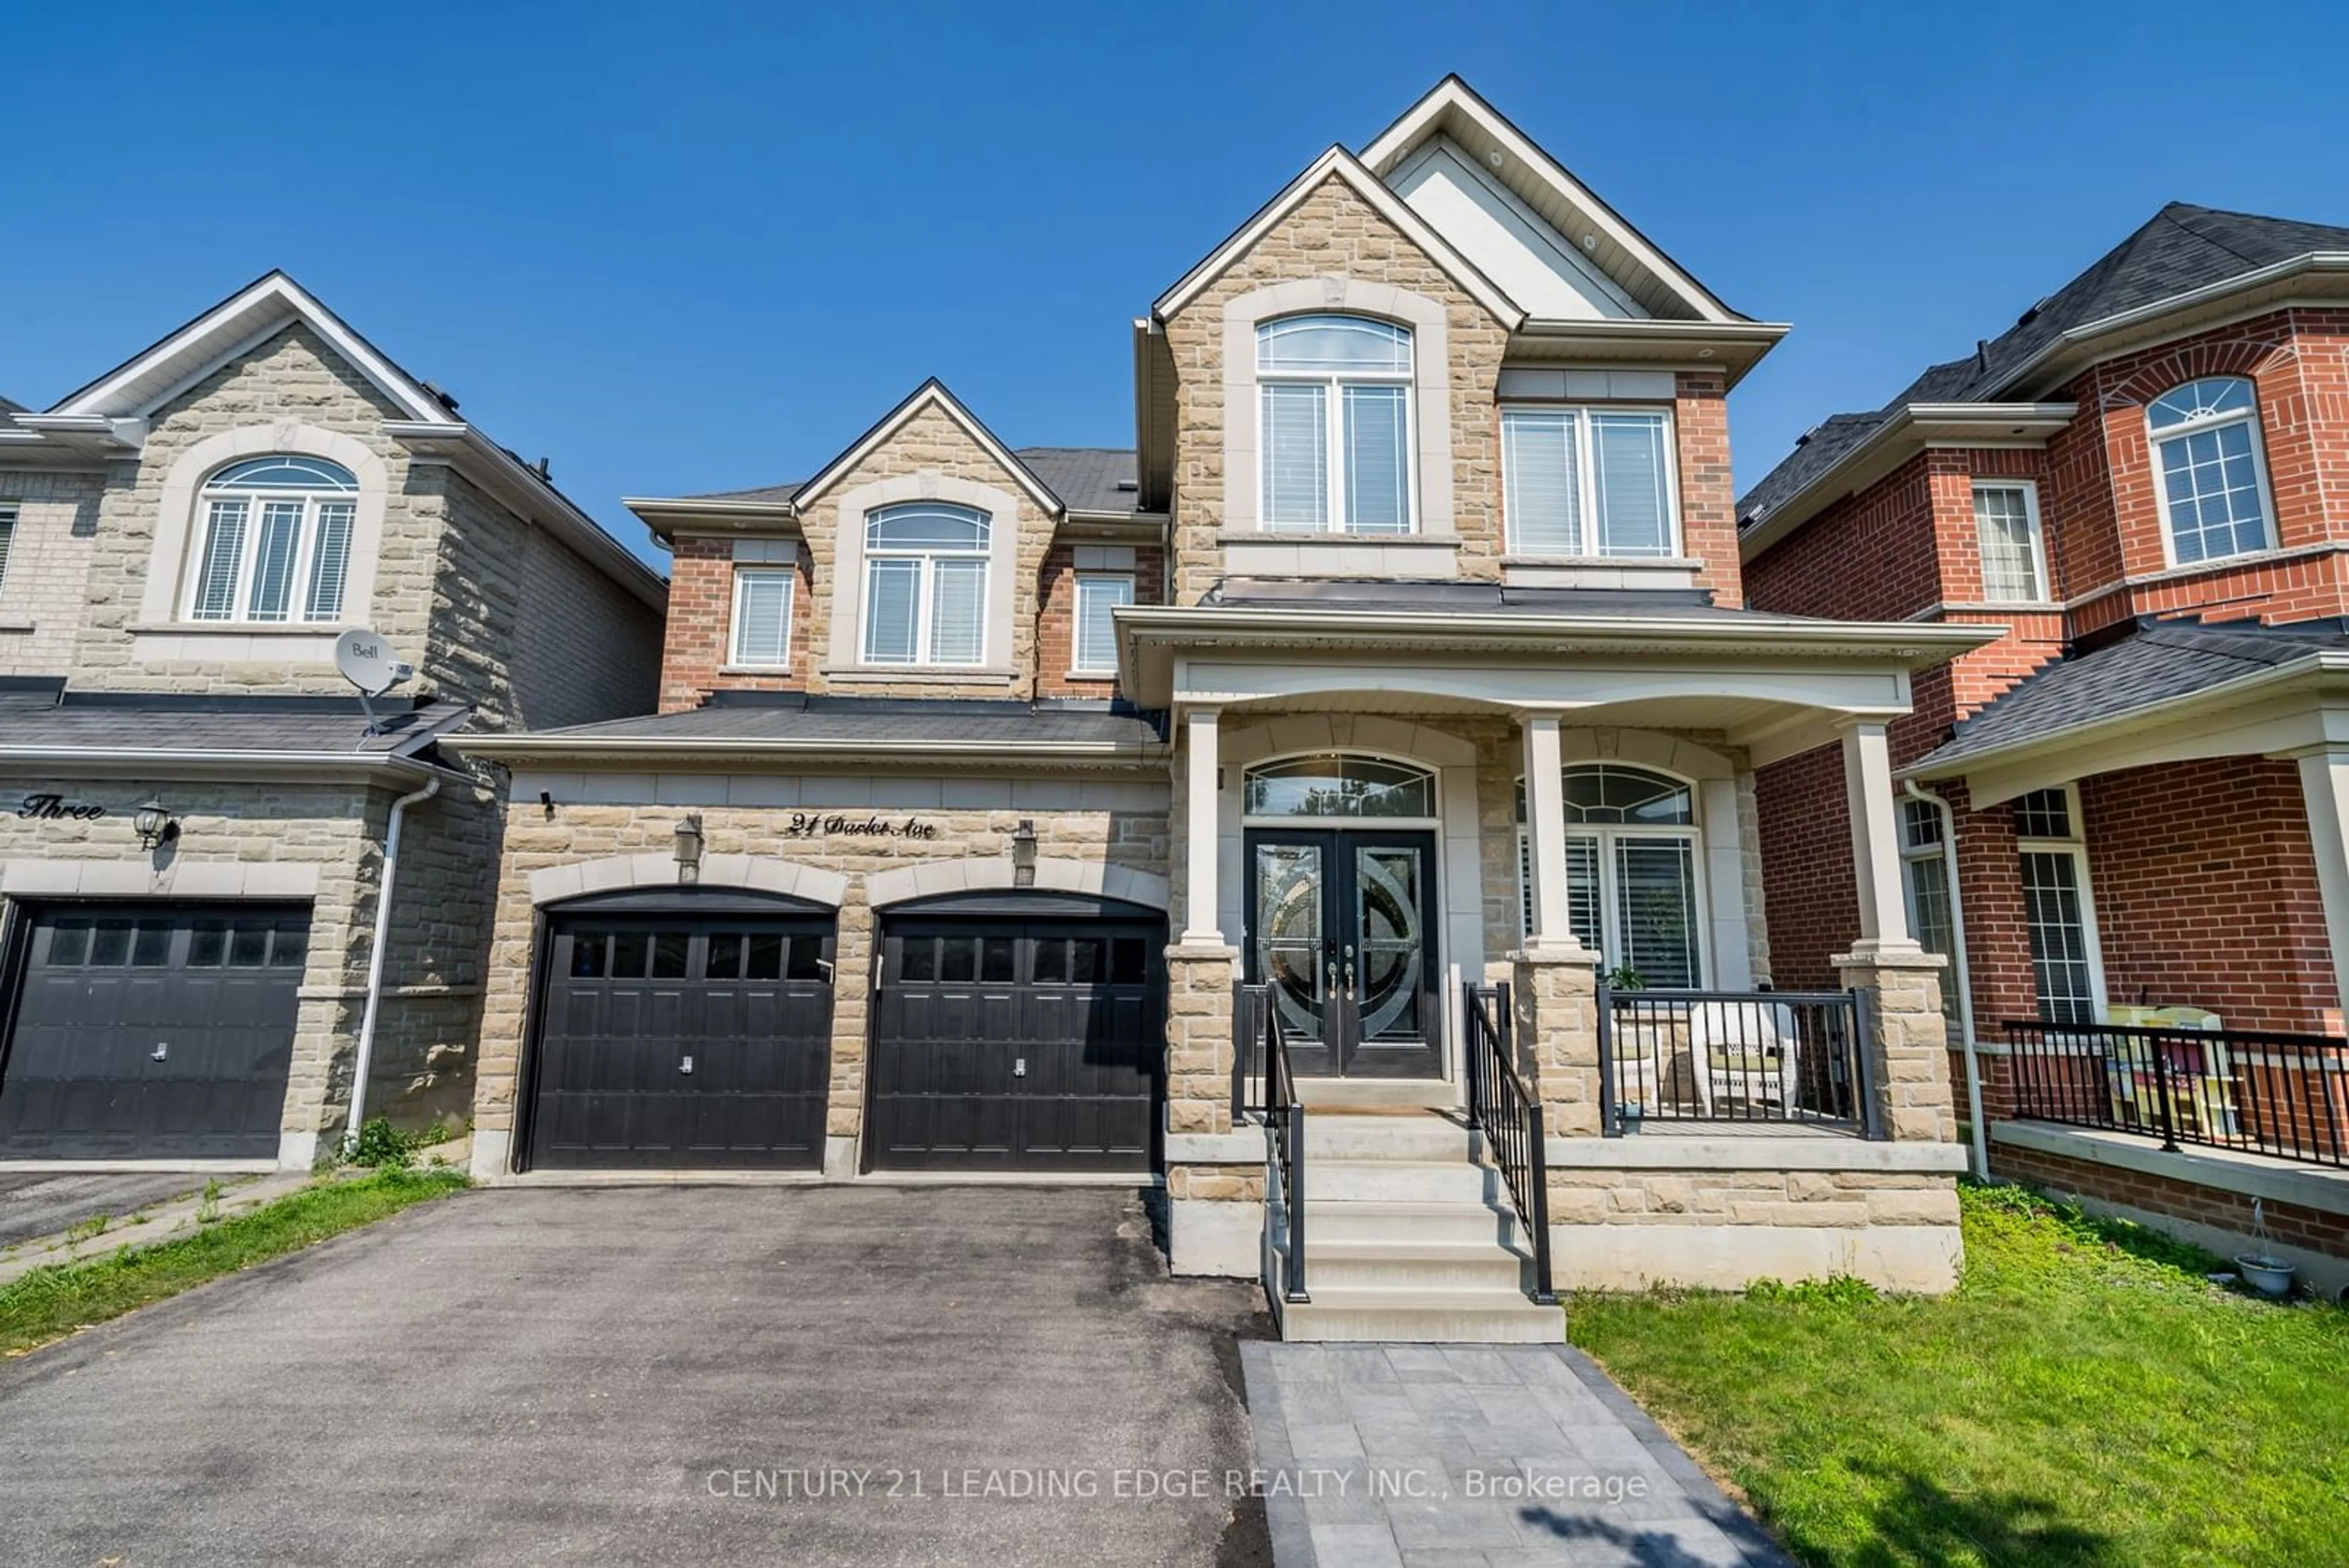 Home with brick exterior material for 21 Darlet Ave, Ajax Ontario L1Z 0G3